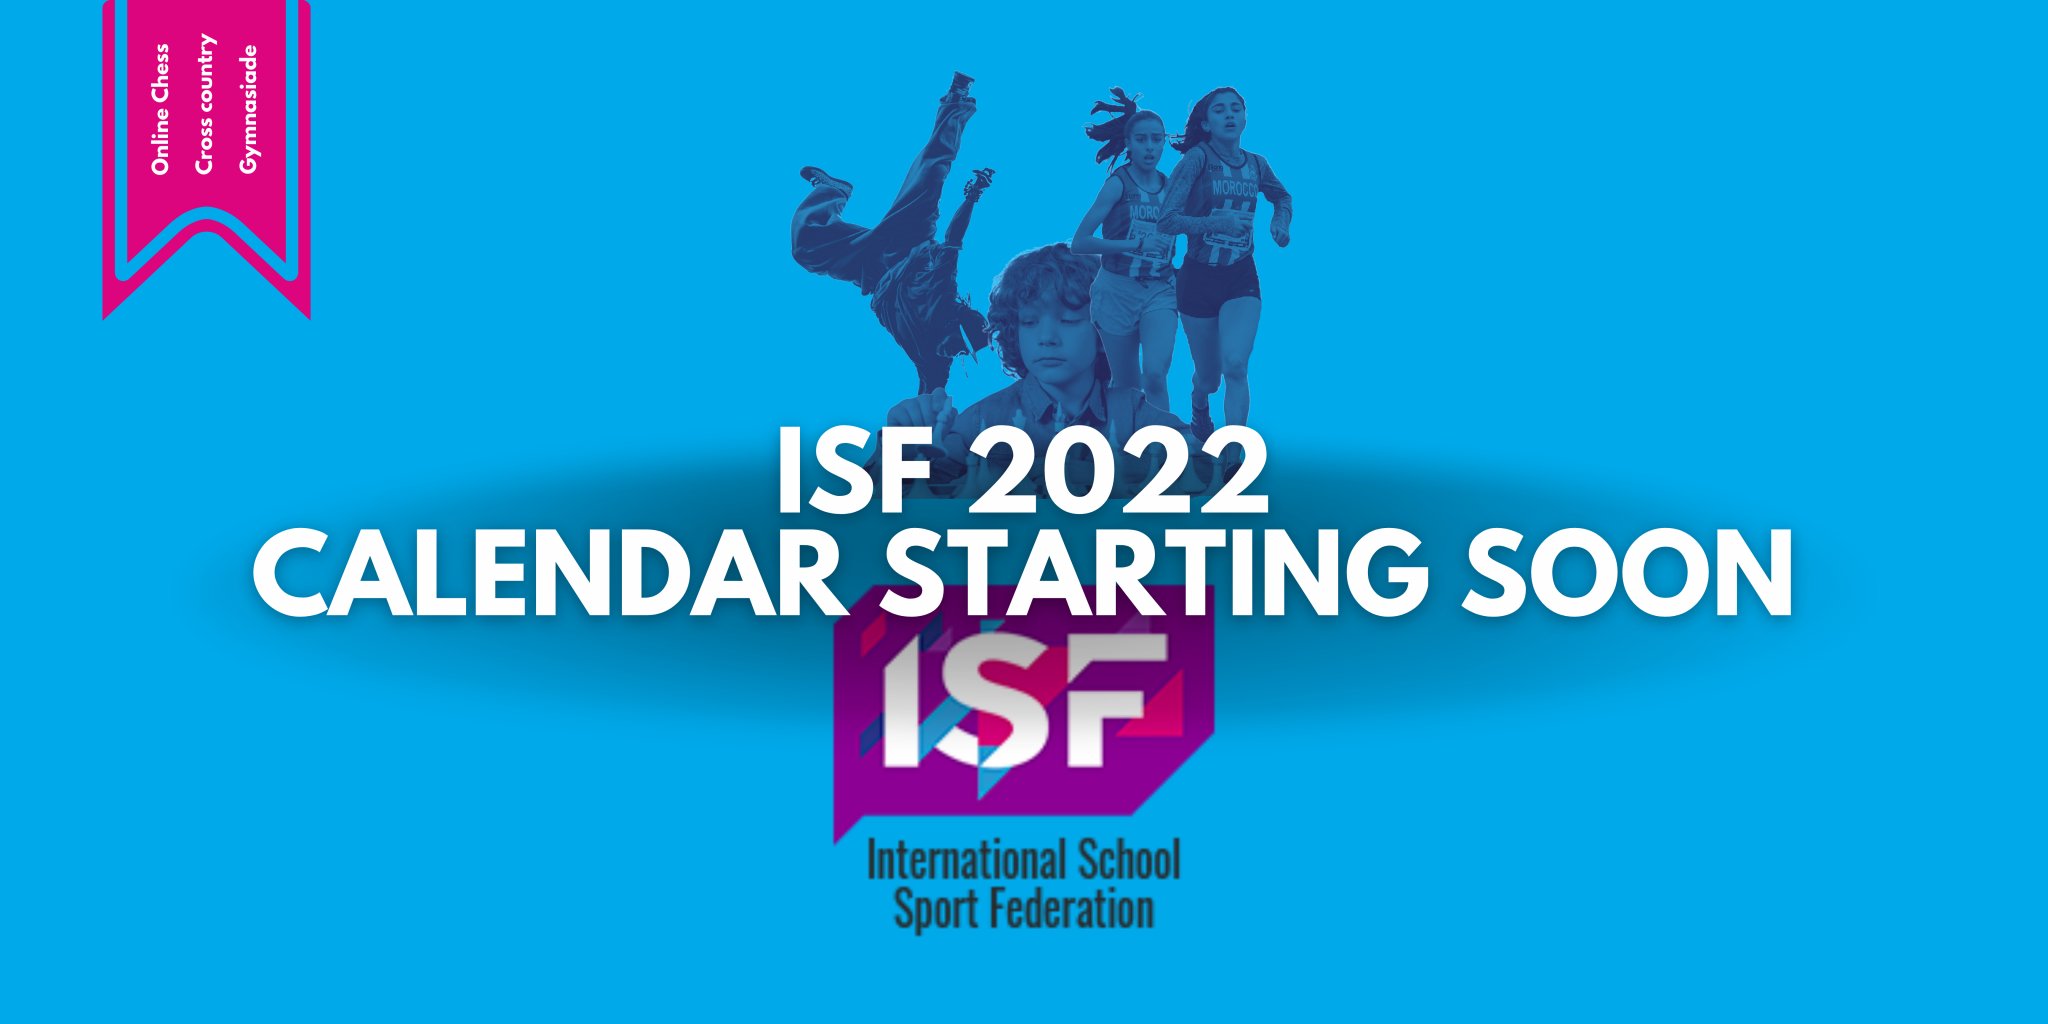 Online chess, cross country and the ISF Gymnasiade are scheduled to be the first three ISF events of 2022 ©ISF